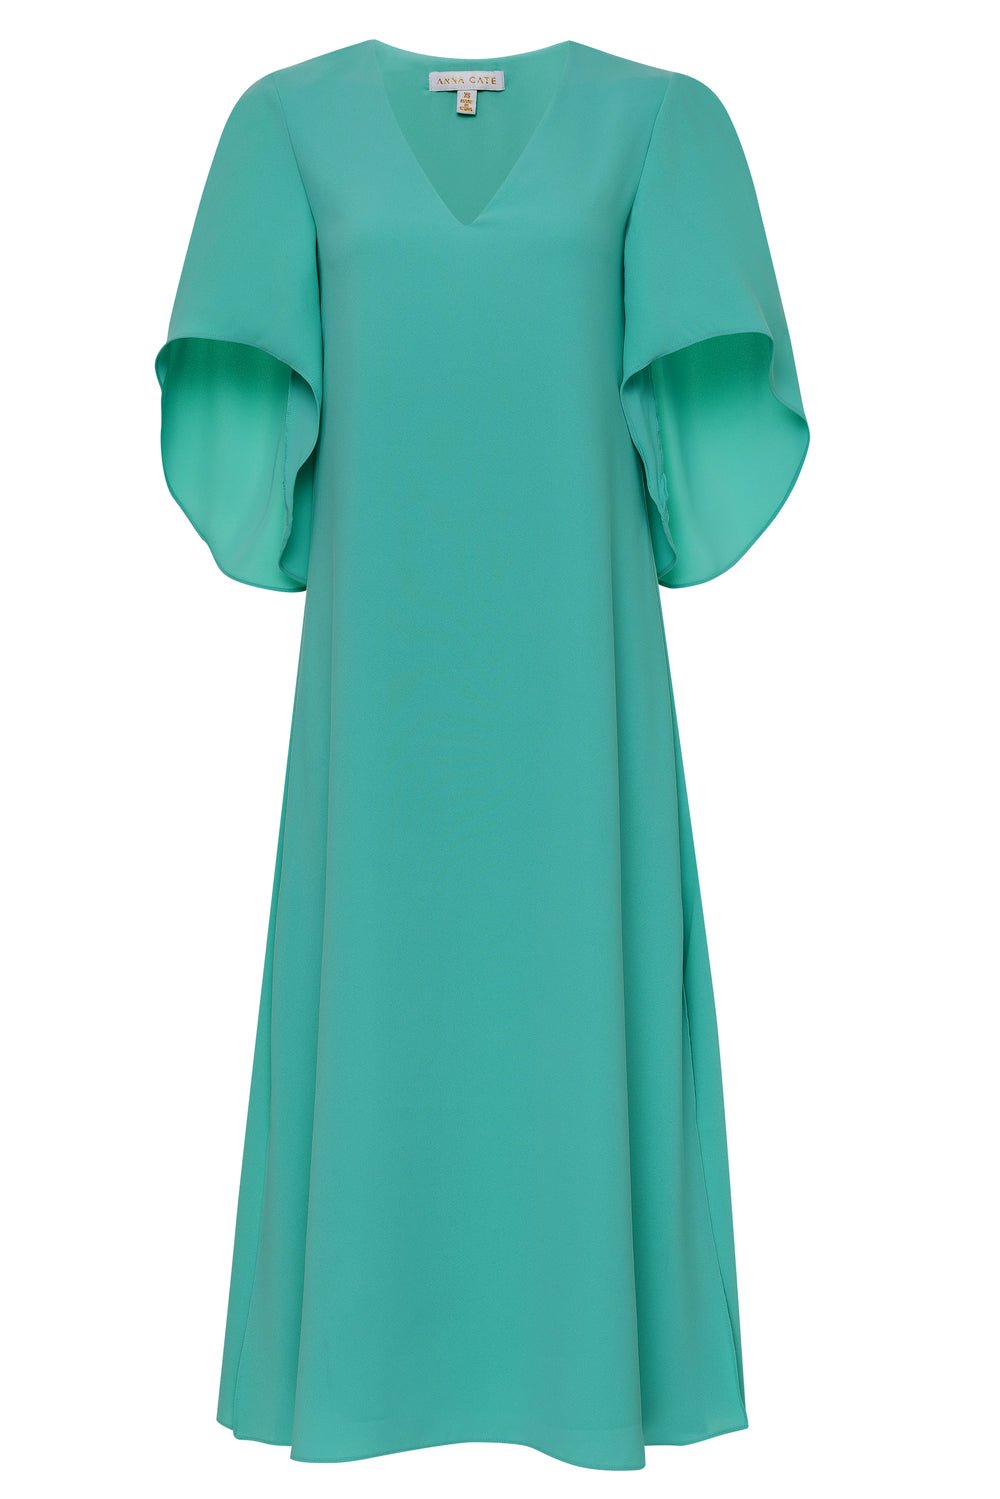 Anna Cate - Meredith Midi S/S Dress - Turquoise - Shorely Chic Boutique